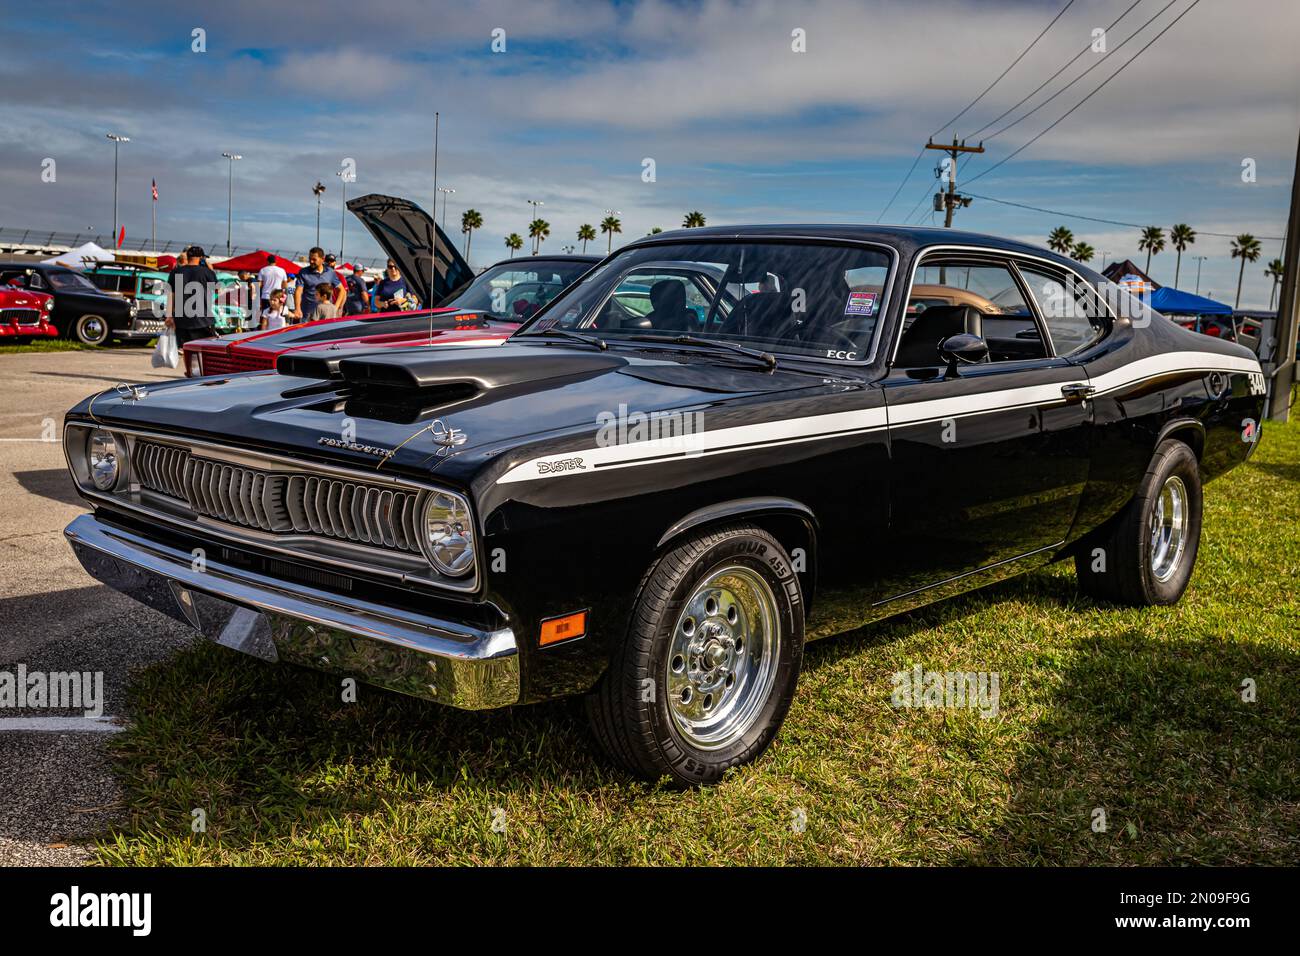 Daytona Beach, FL - November 26, 2022: High perspective front corner view of a 1972 Plymouth Duster 2 Door Hardtop at a local car show. Stock Photo